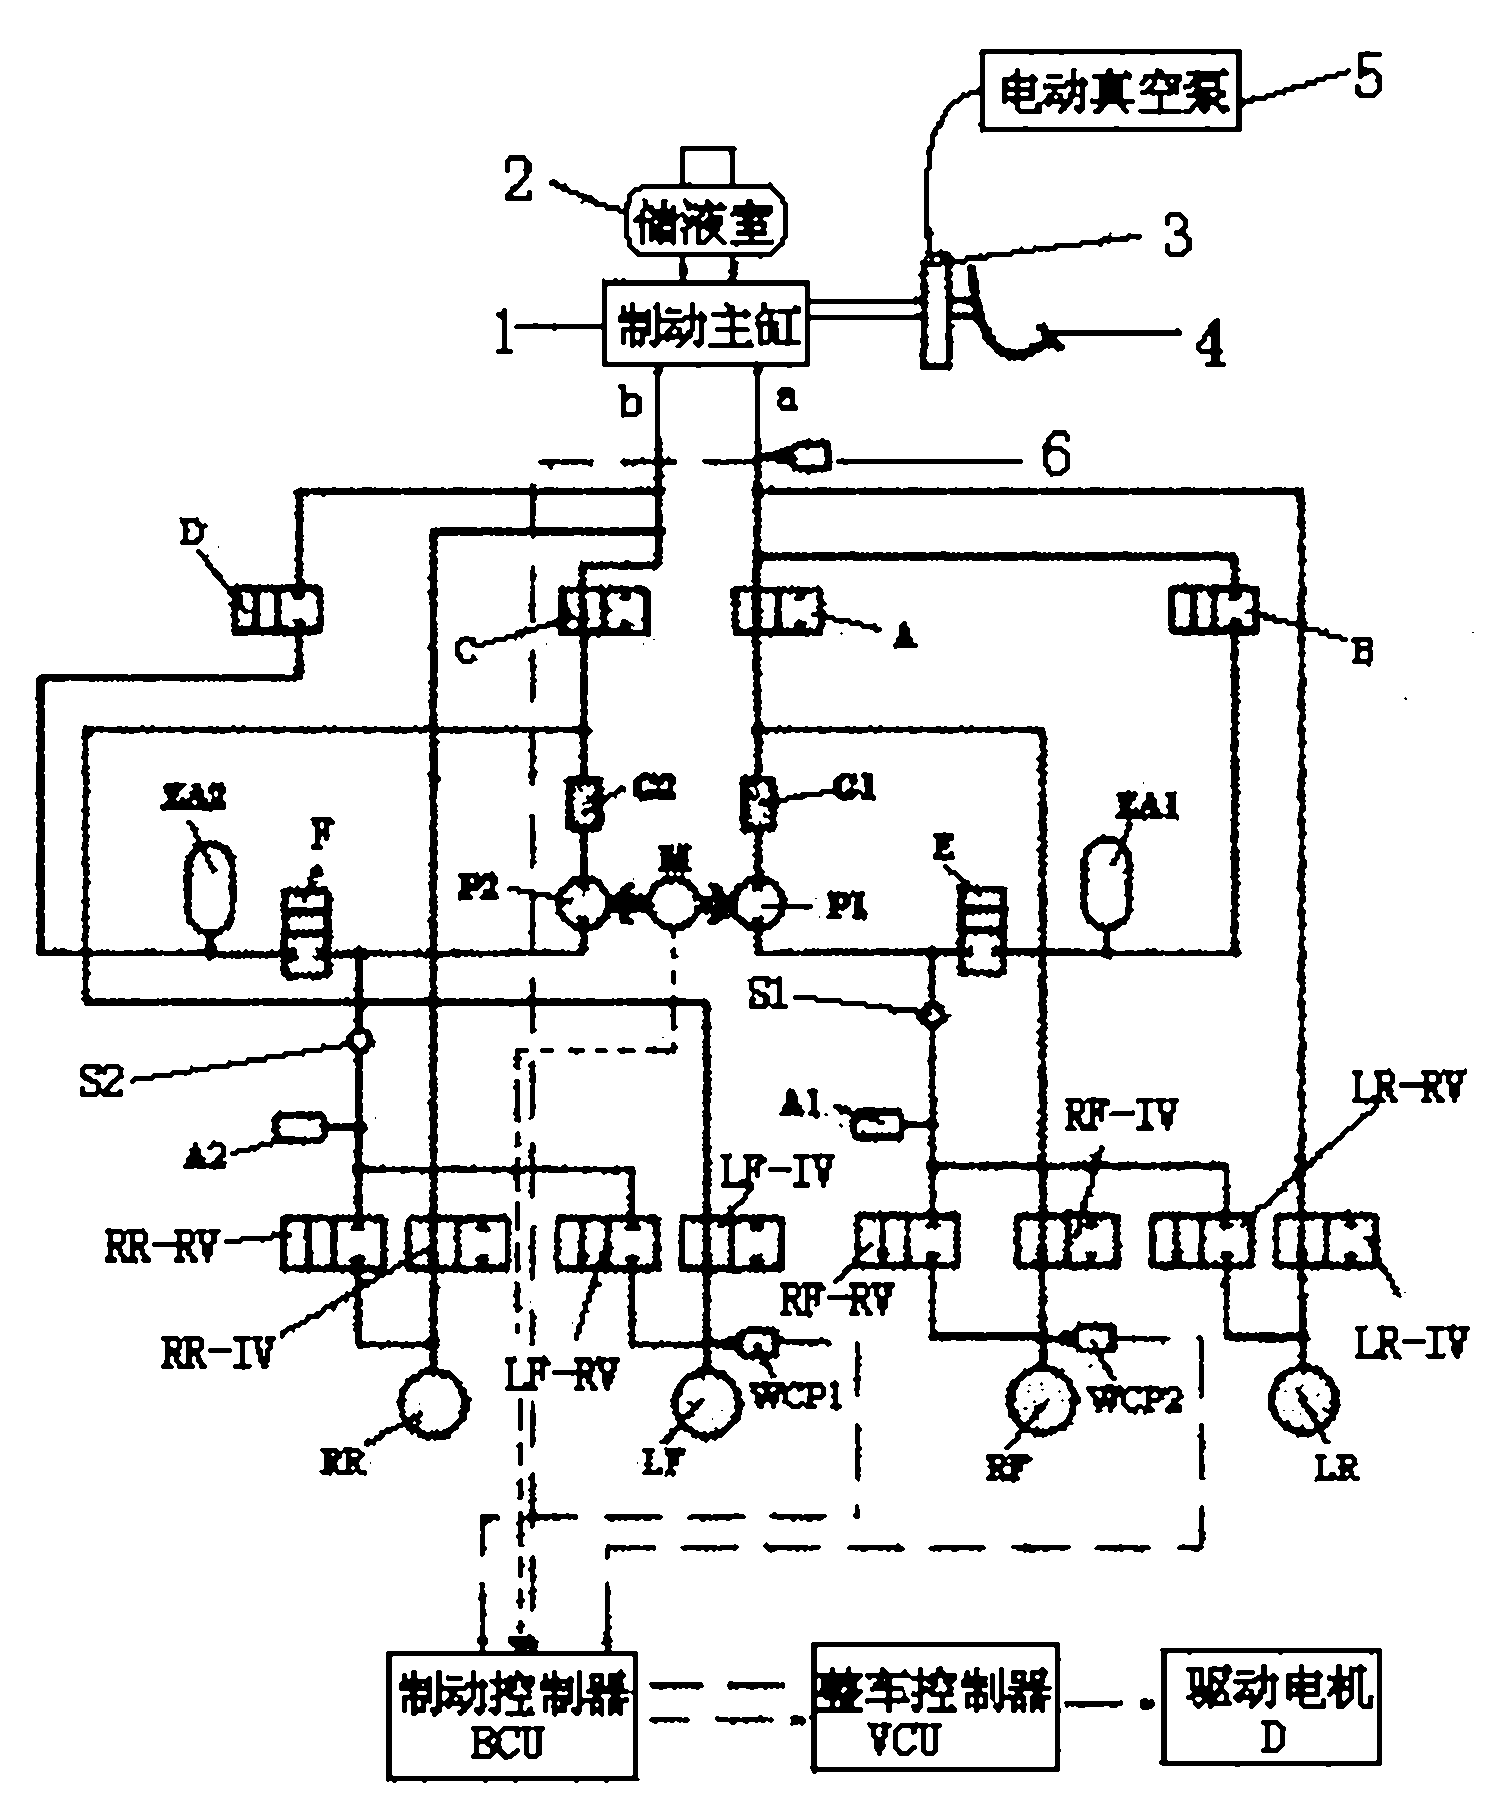 X-type pipeline layout energy feedback type hydraulic antilock brake system for electric vehicle